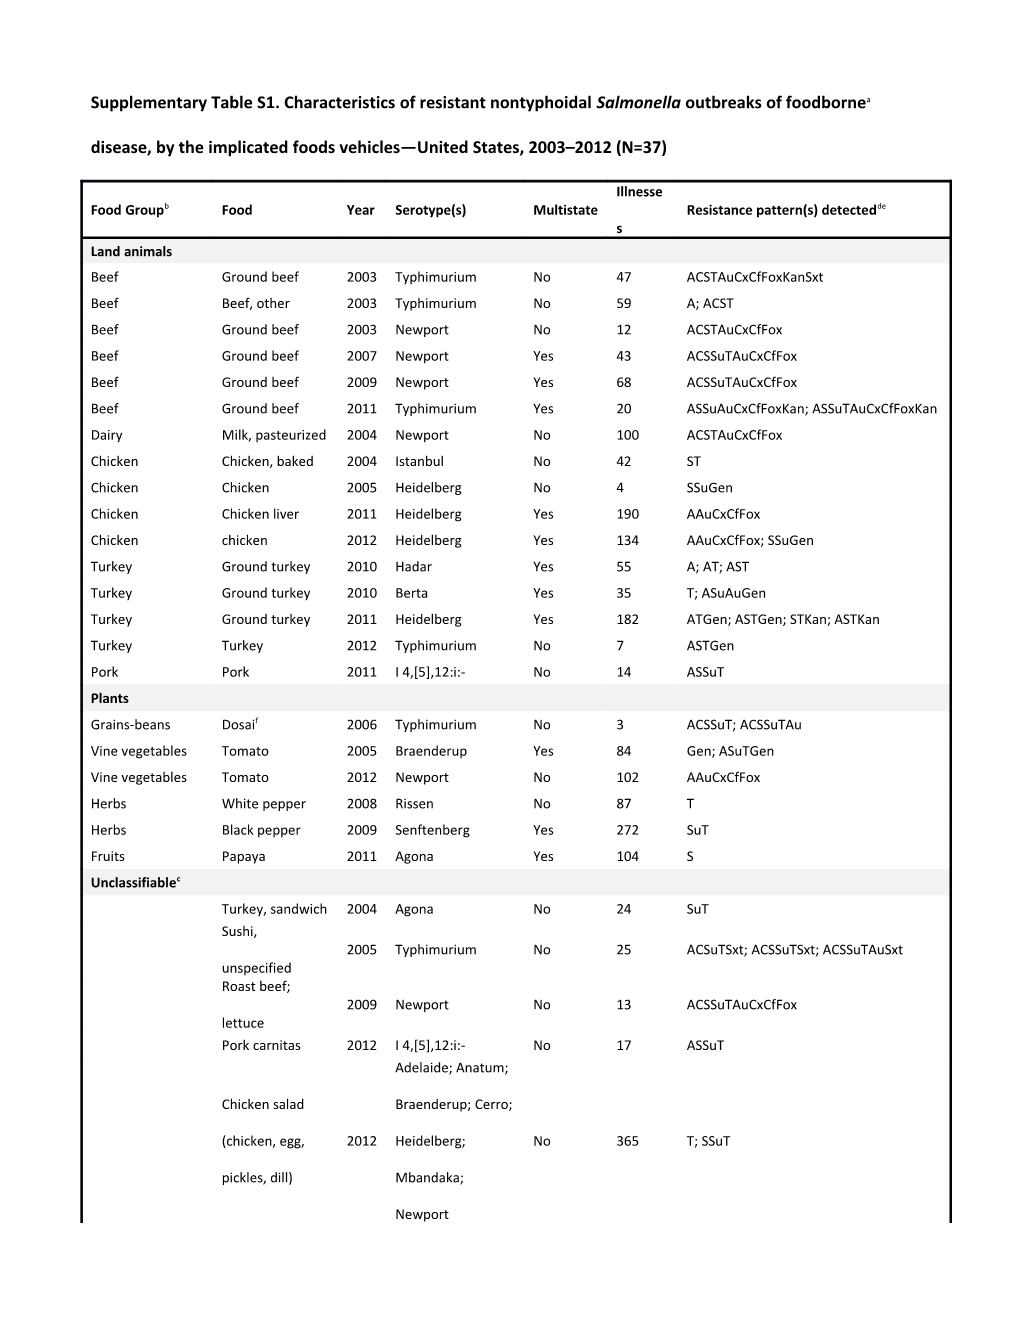 Supplementary Table S1. Characteristics of Resistant Nontyphoidal Salmonellaoutbreaks